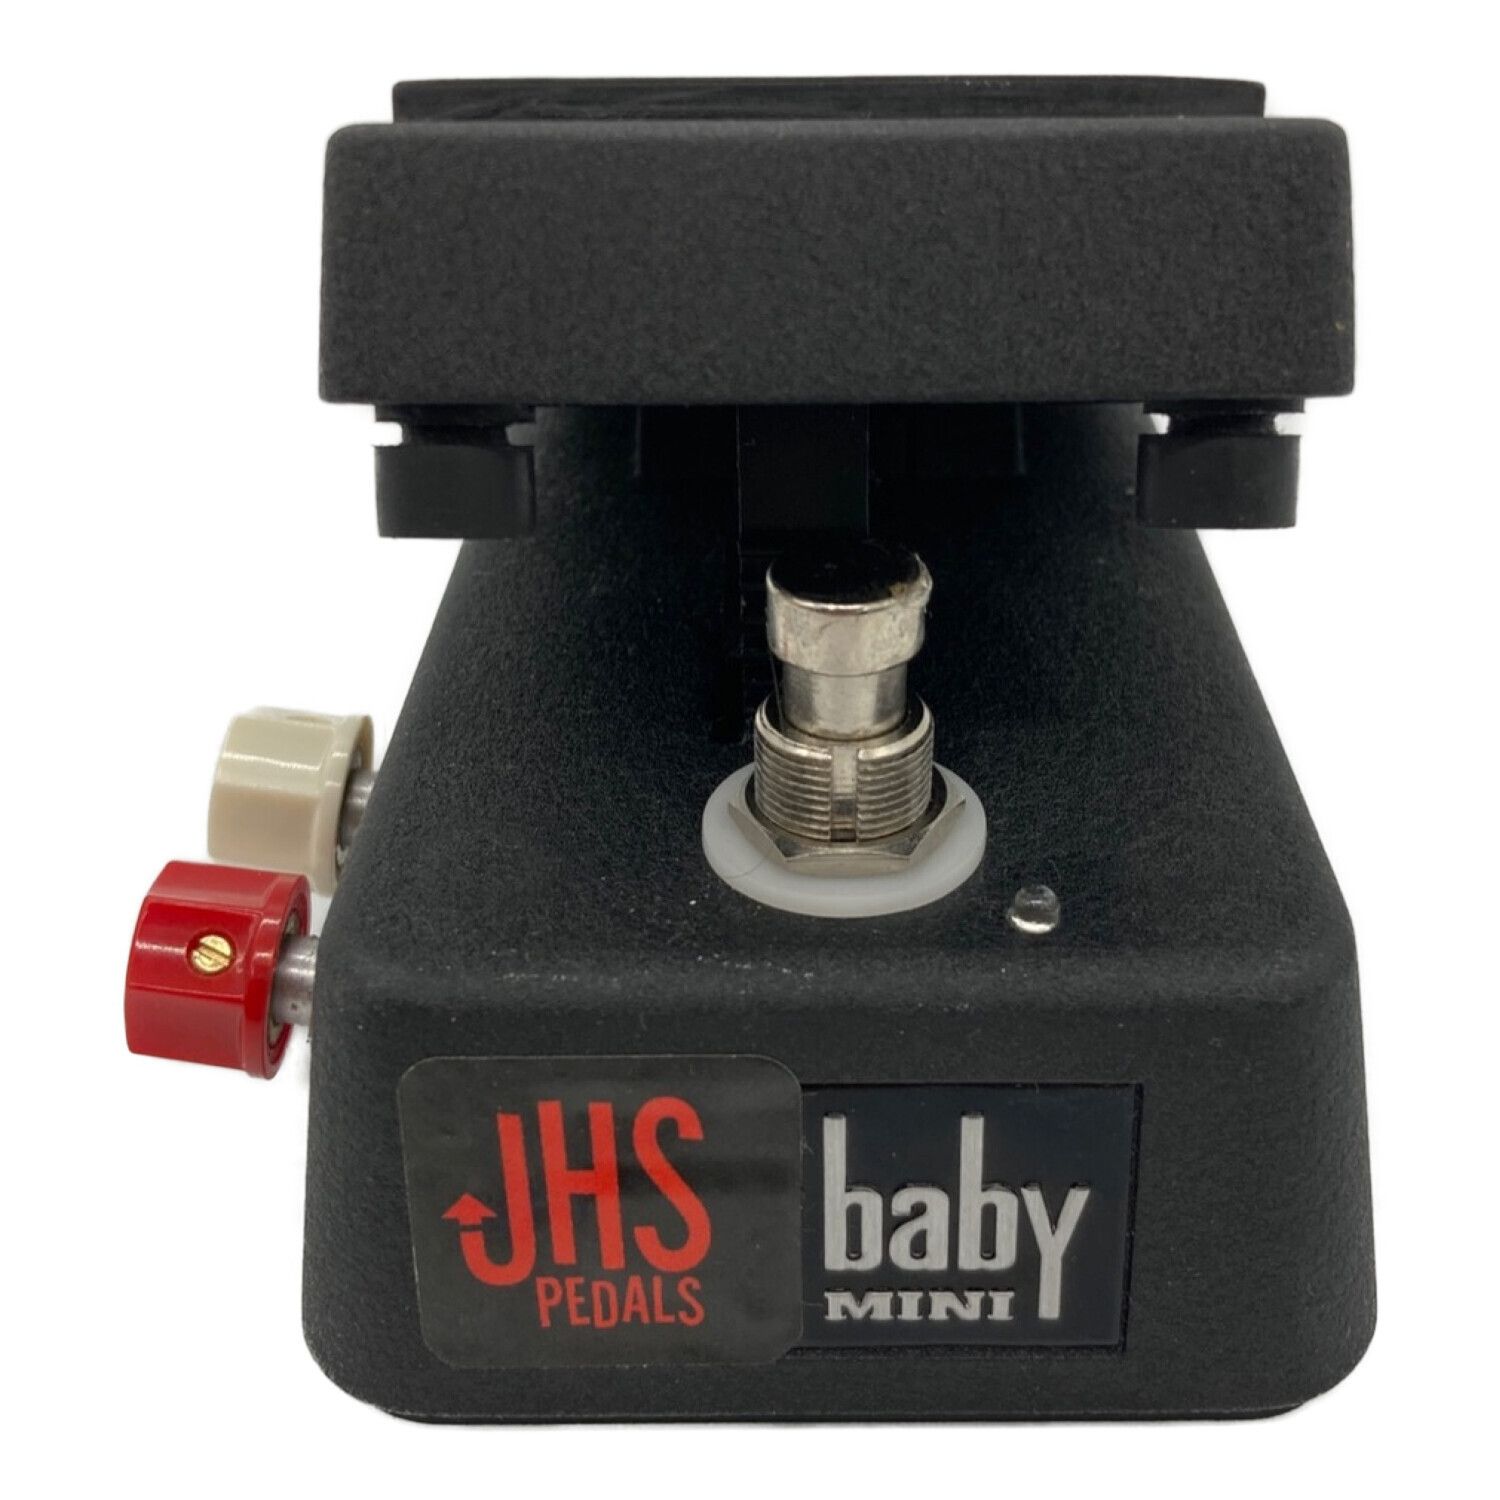 JHS PEDALS Cry baby Super Mod